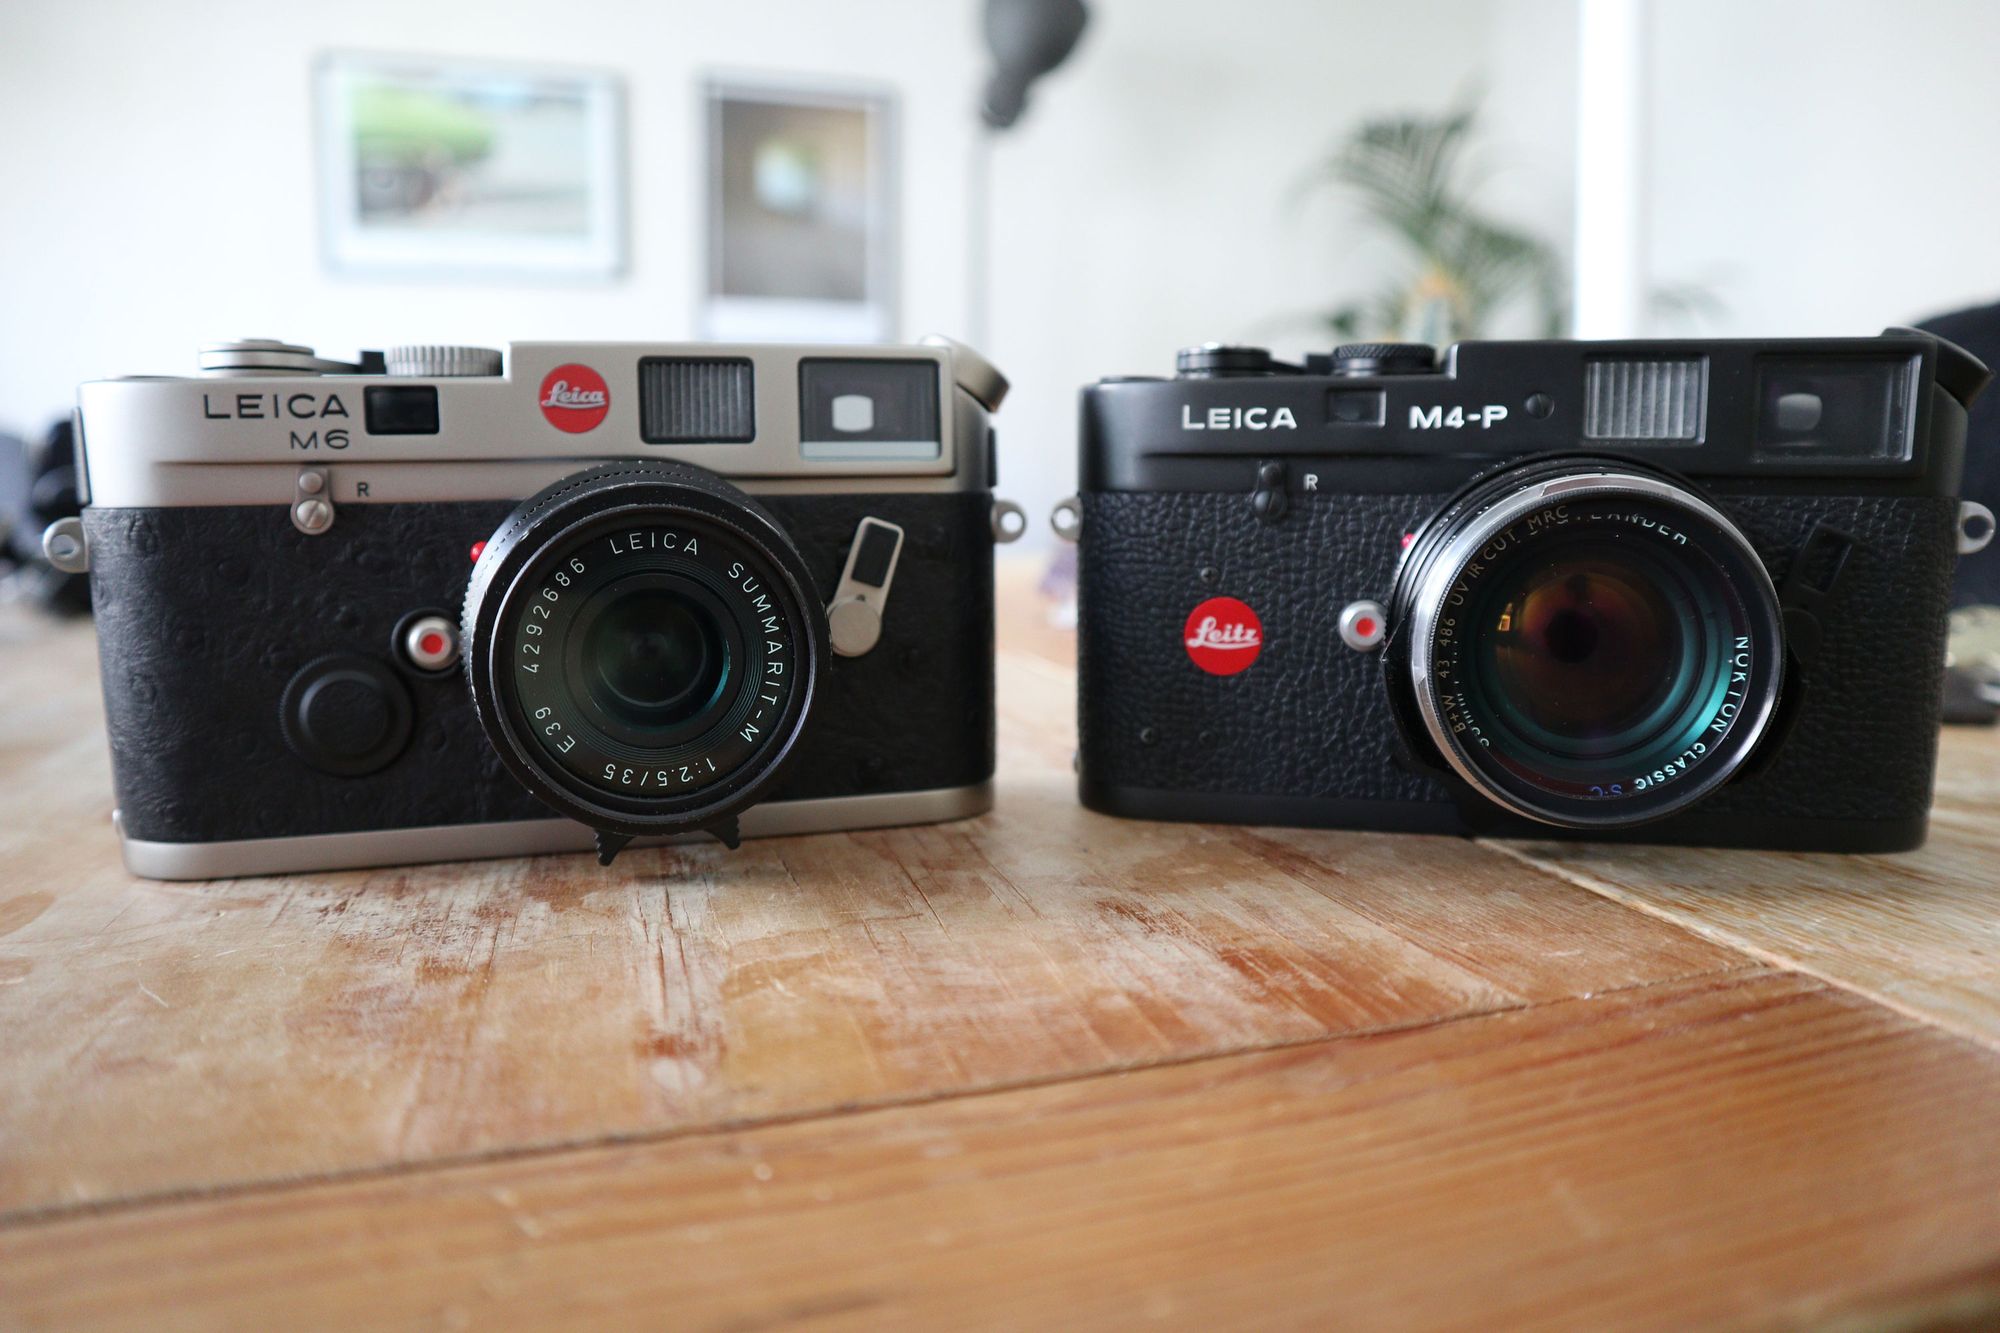 Leica M6 vs Leica M4-P : What's the difference?